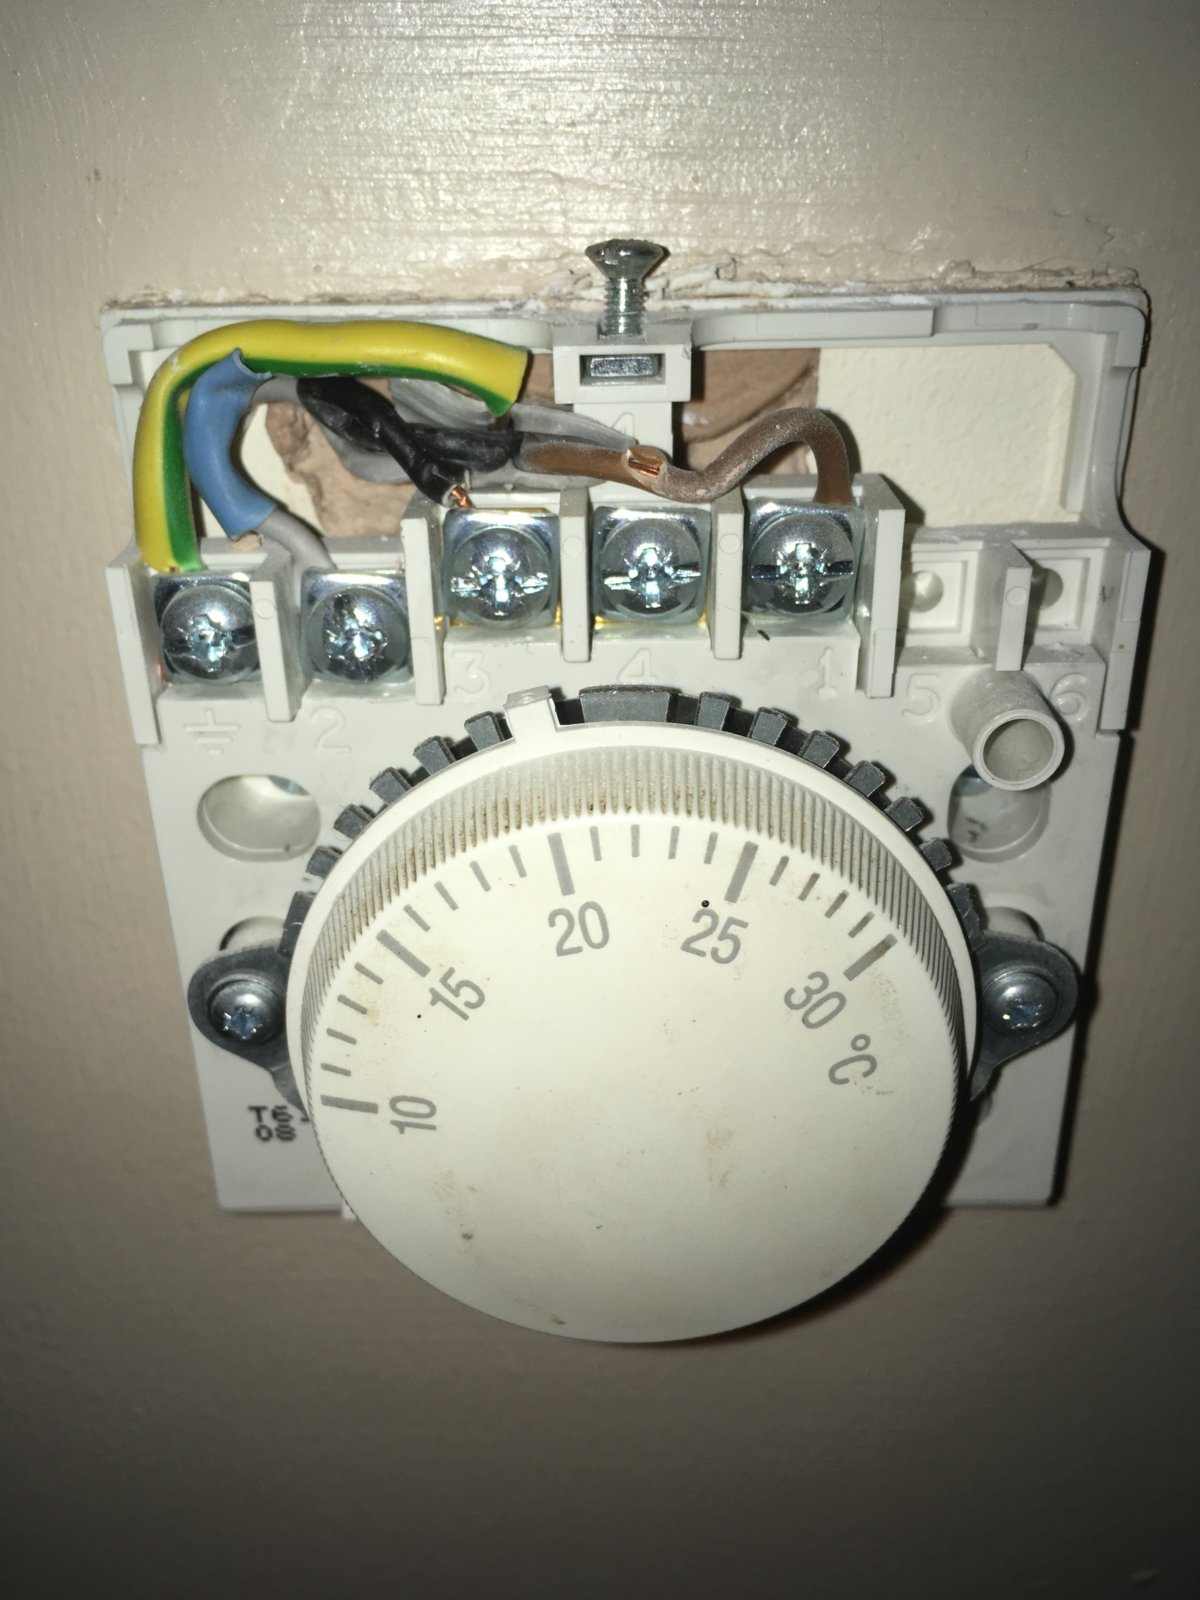 Replacing Honeywell T6360B with DT92E | DIYnot Forums  Wiring Diagram For Honeywell T6360b Room Thermostat    DIYnot.com